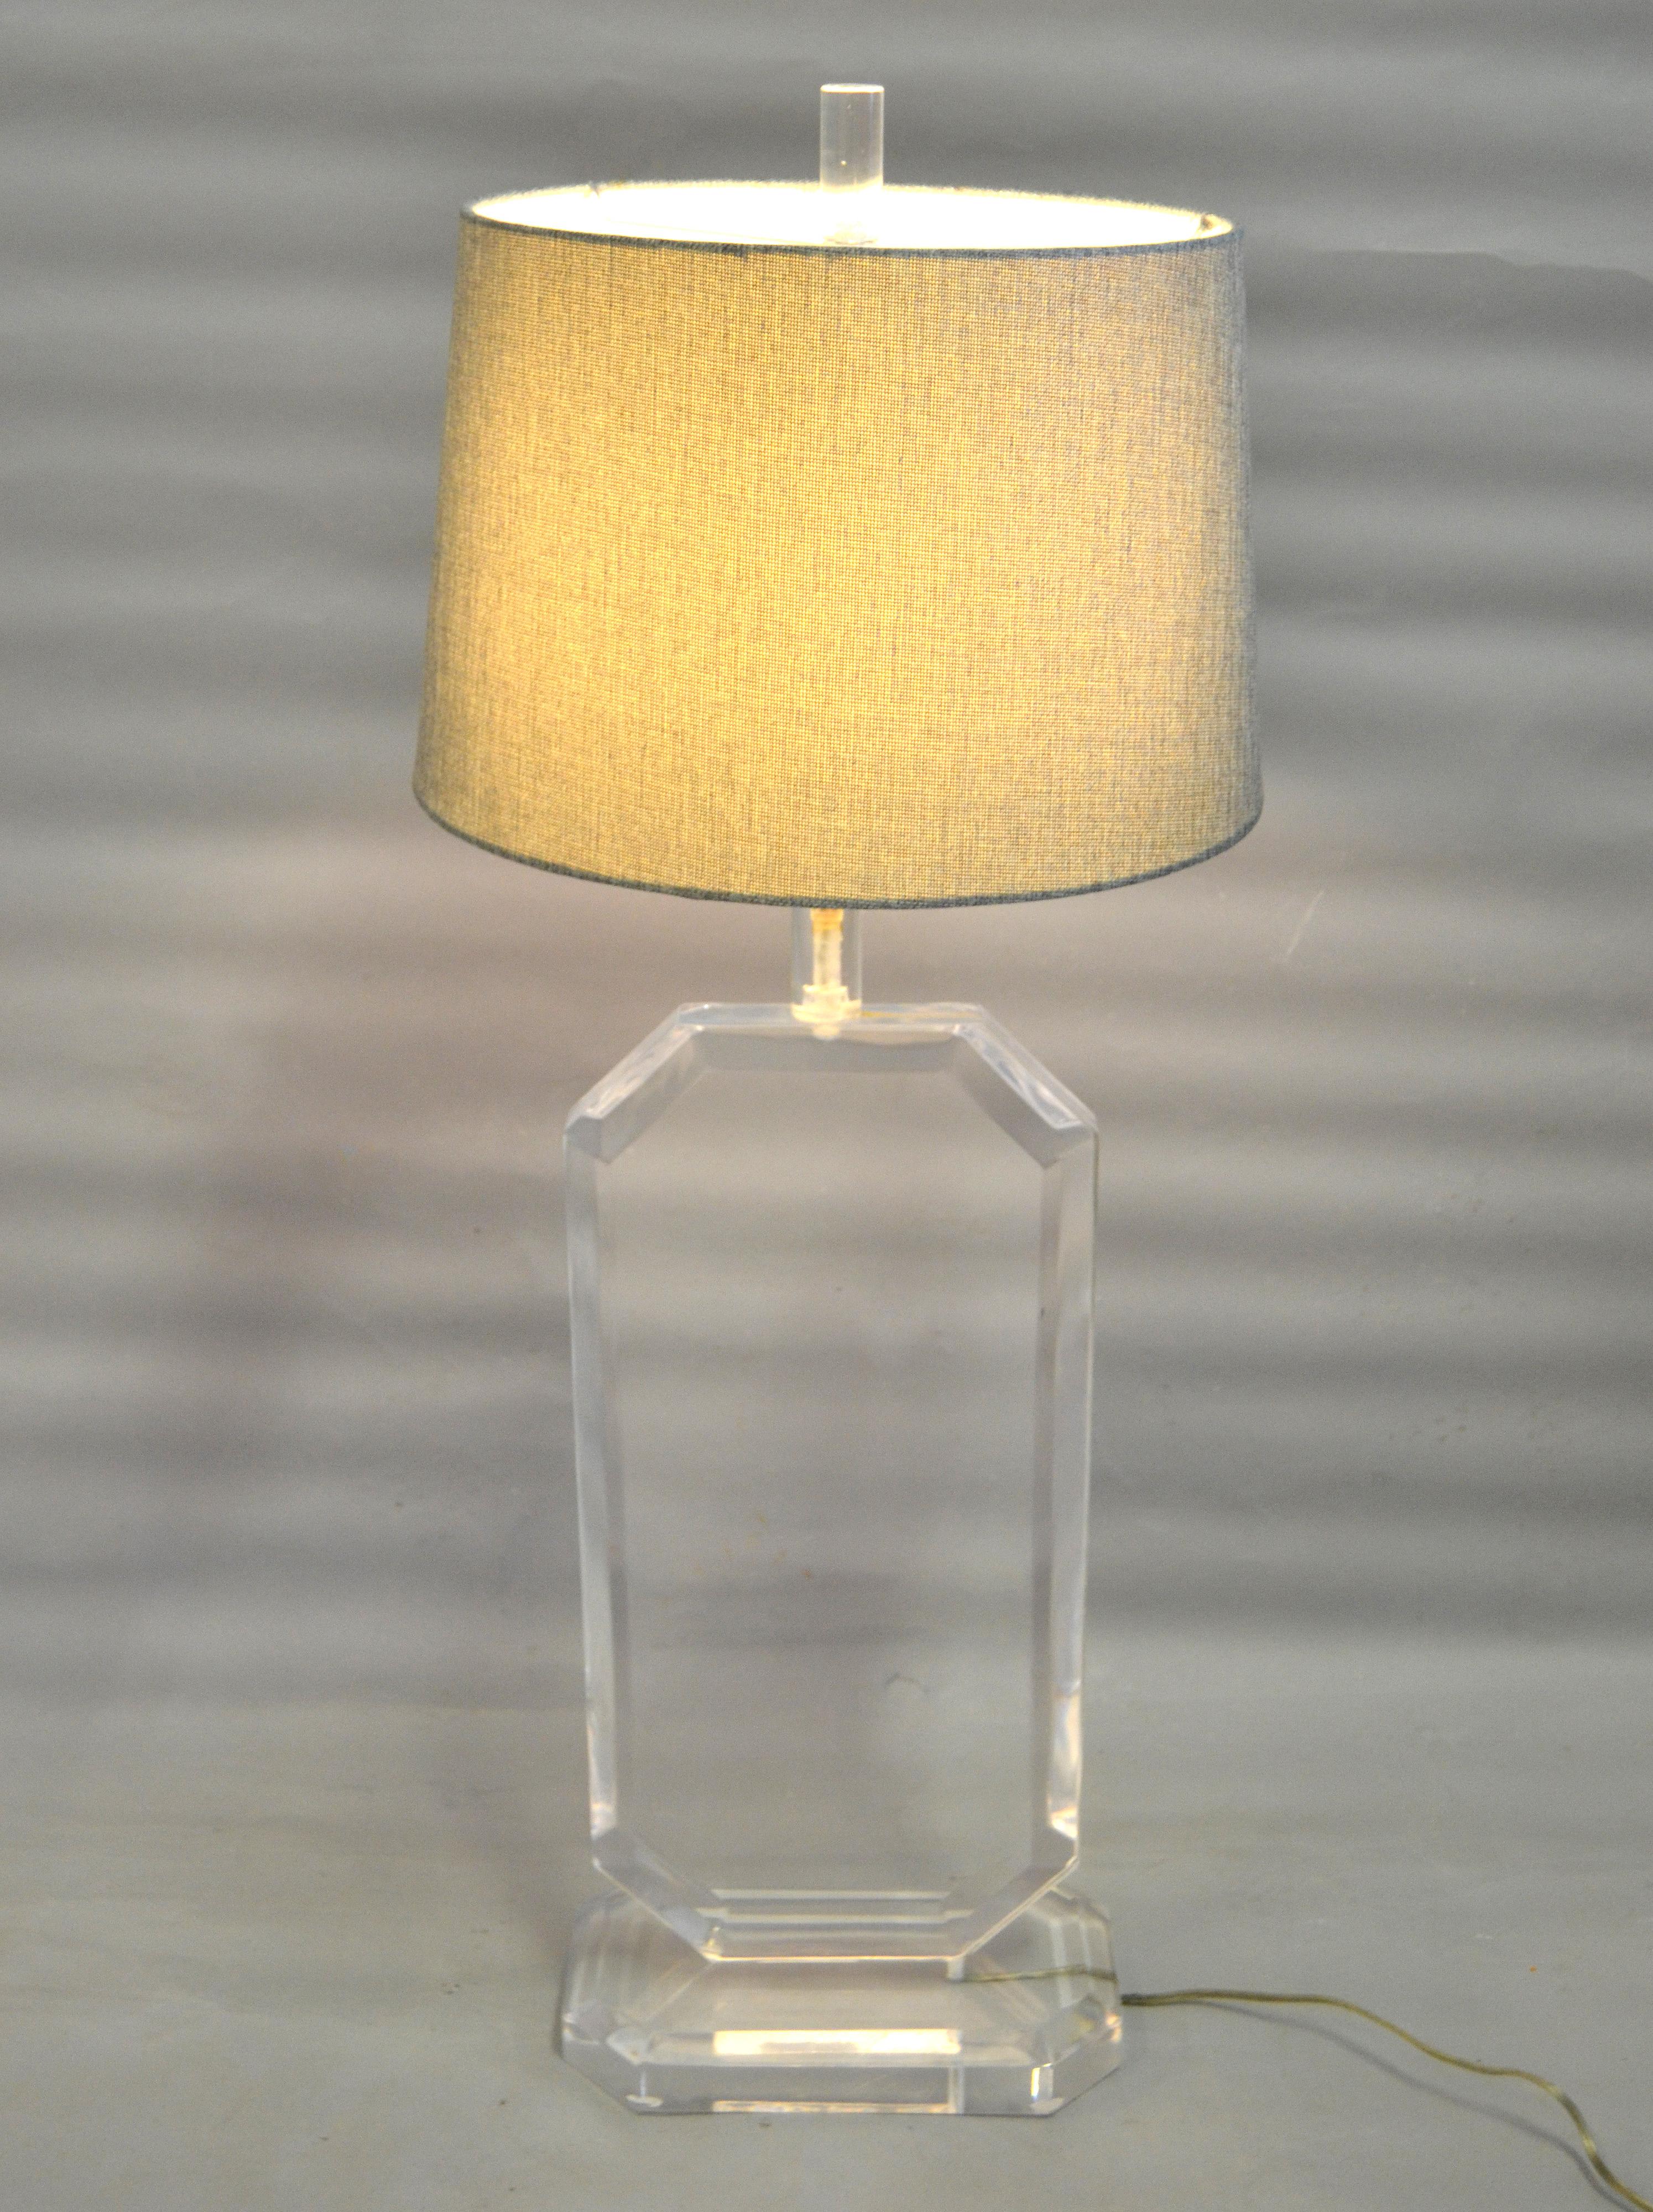 Heavy and massive Lucite table lamp with harp and finial.
The Lucite is beveled and slim, rectangular in shape, very unique design.
This table lamp looks great from any angle.
It is wired for the U.S. and comes with a switch.
Uses a max. 60